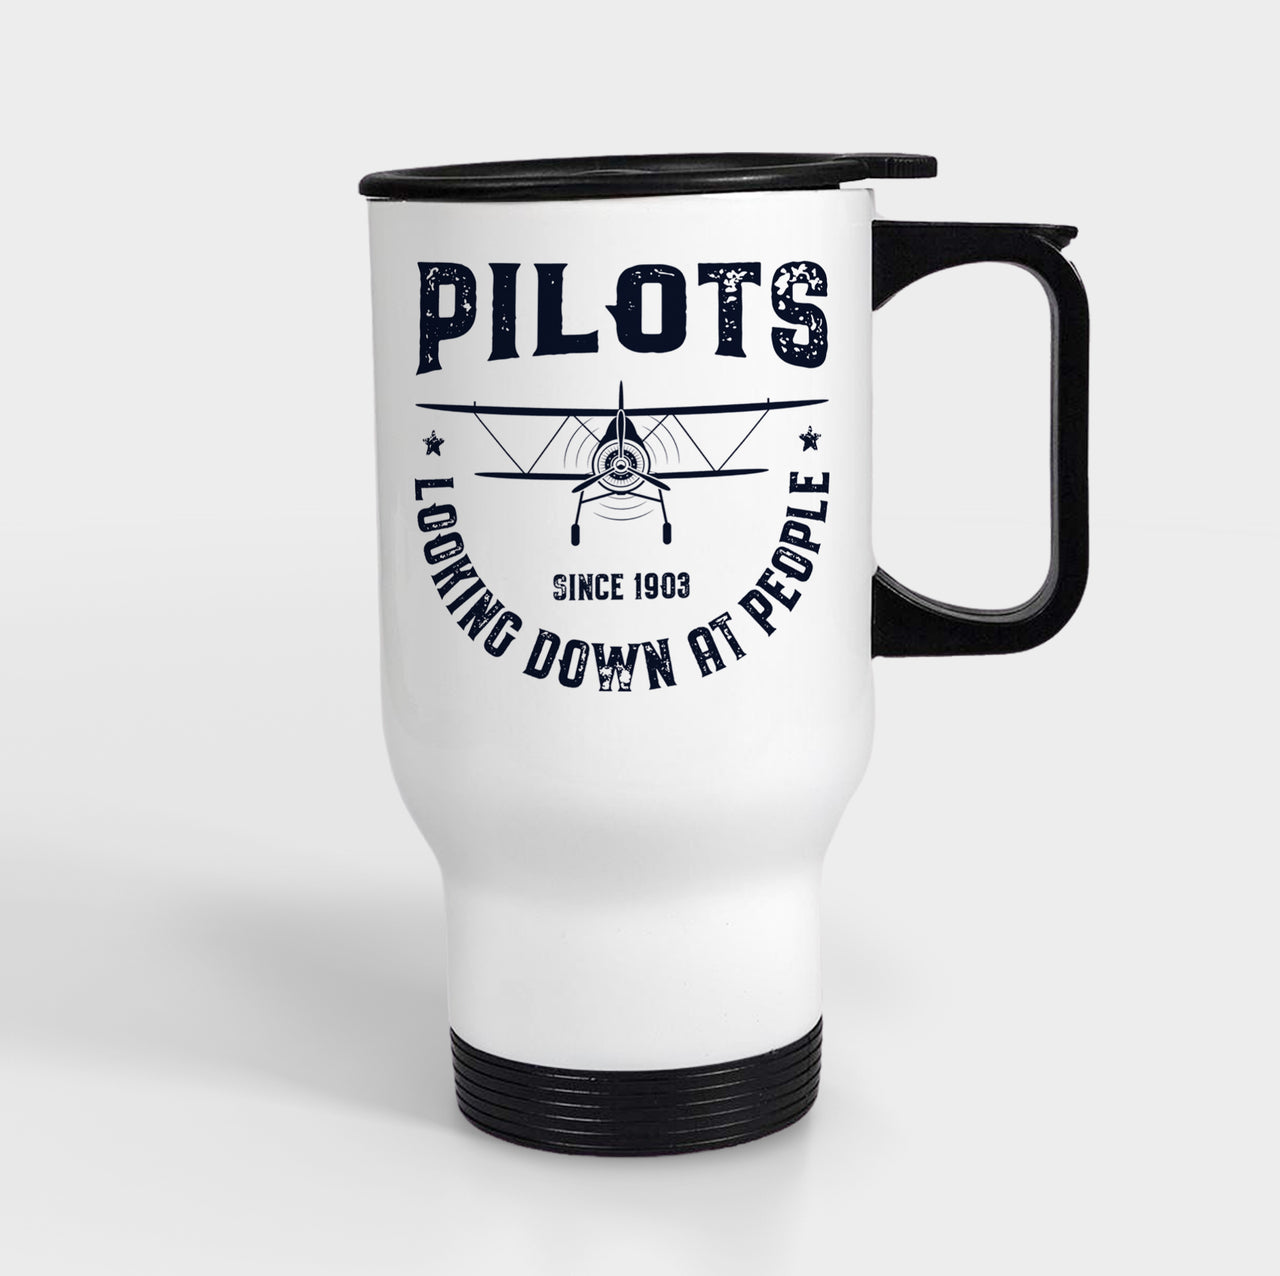 Pilots Looking Down at People Since 1903 Designed Travel Mugs (With Holder)